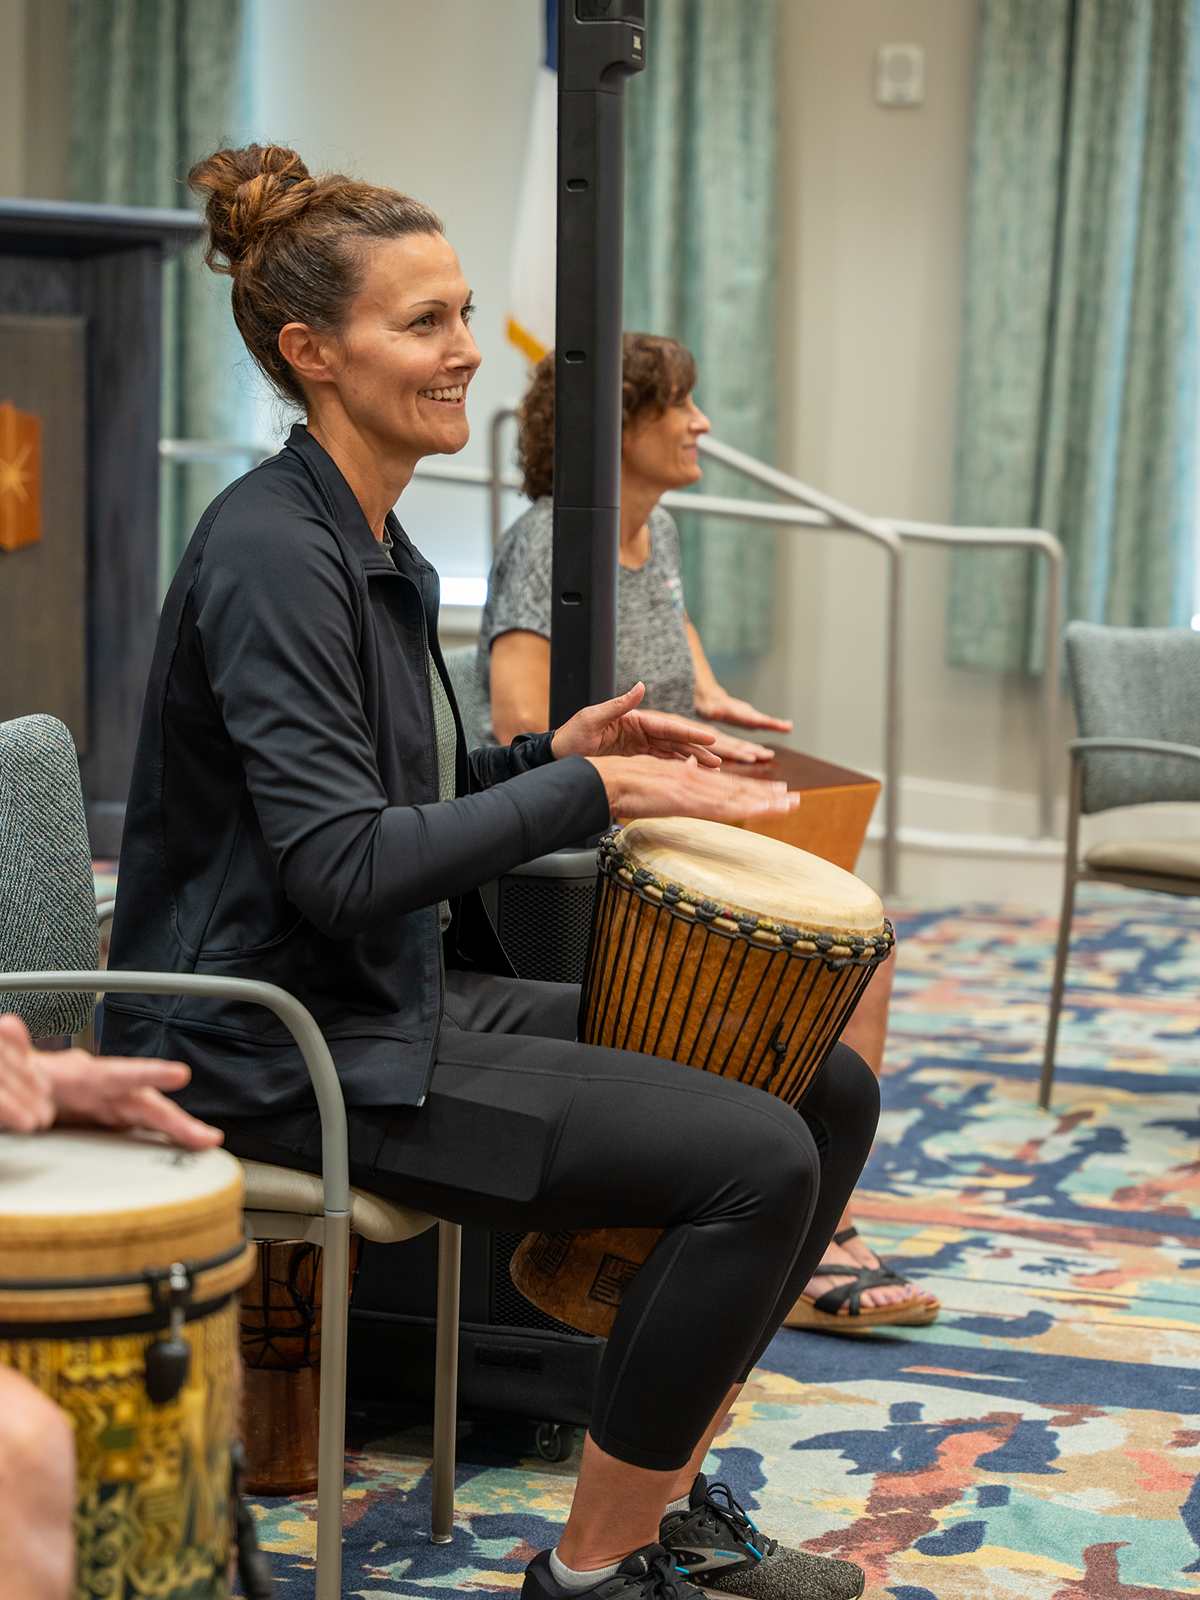 An Immanuel life enrichment coordinator plays the hand drums.